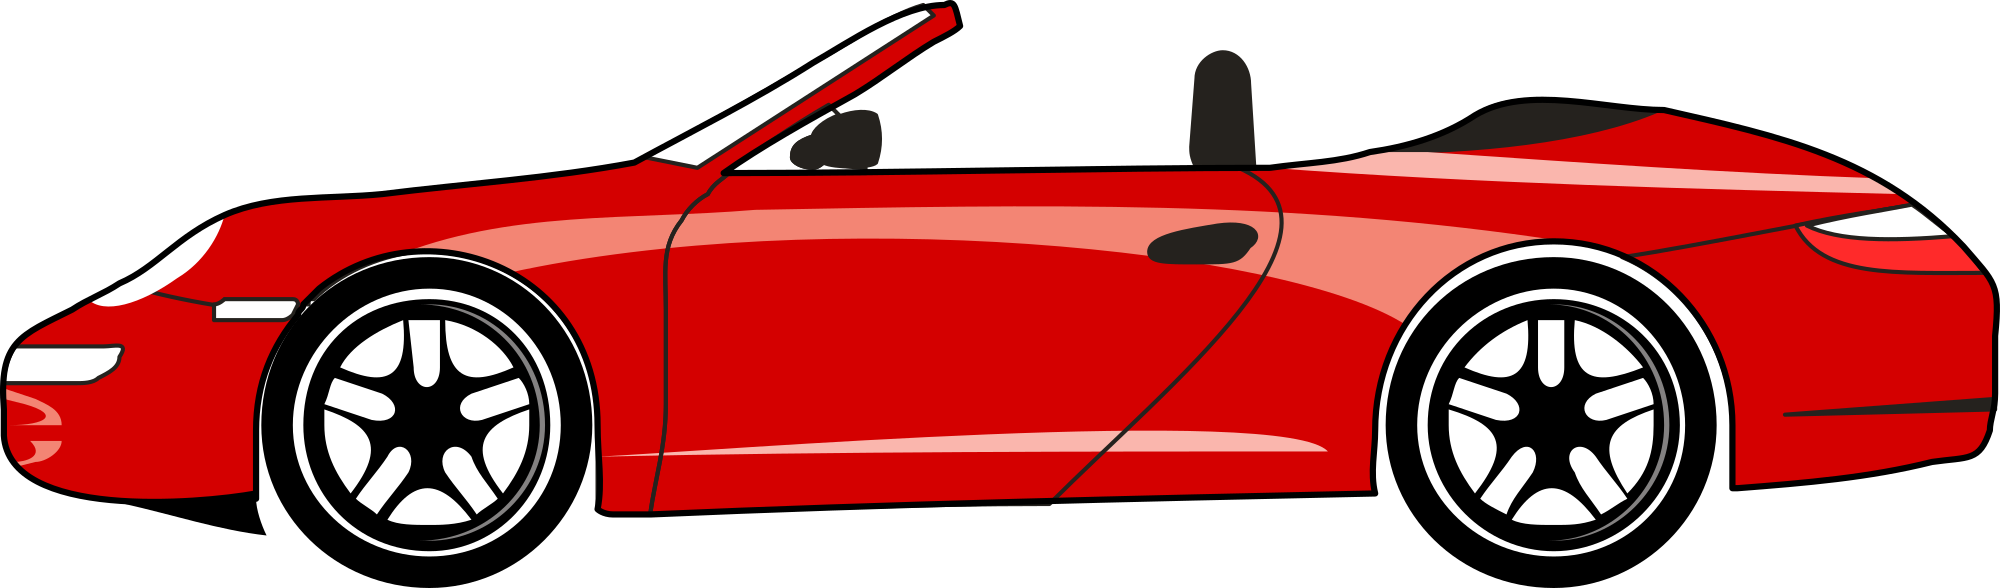 Red car vector clipart